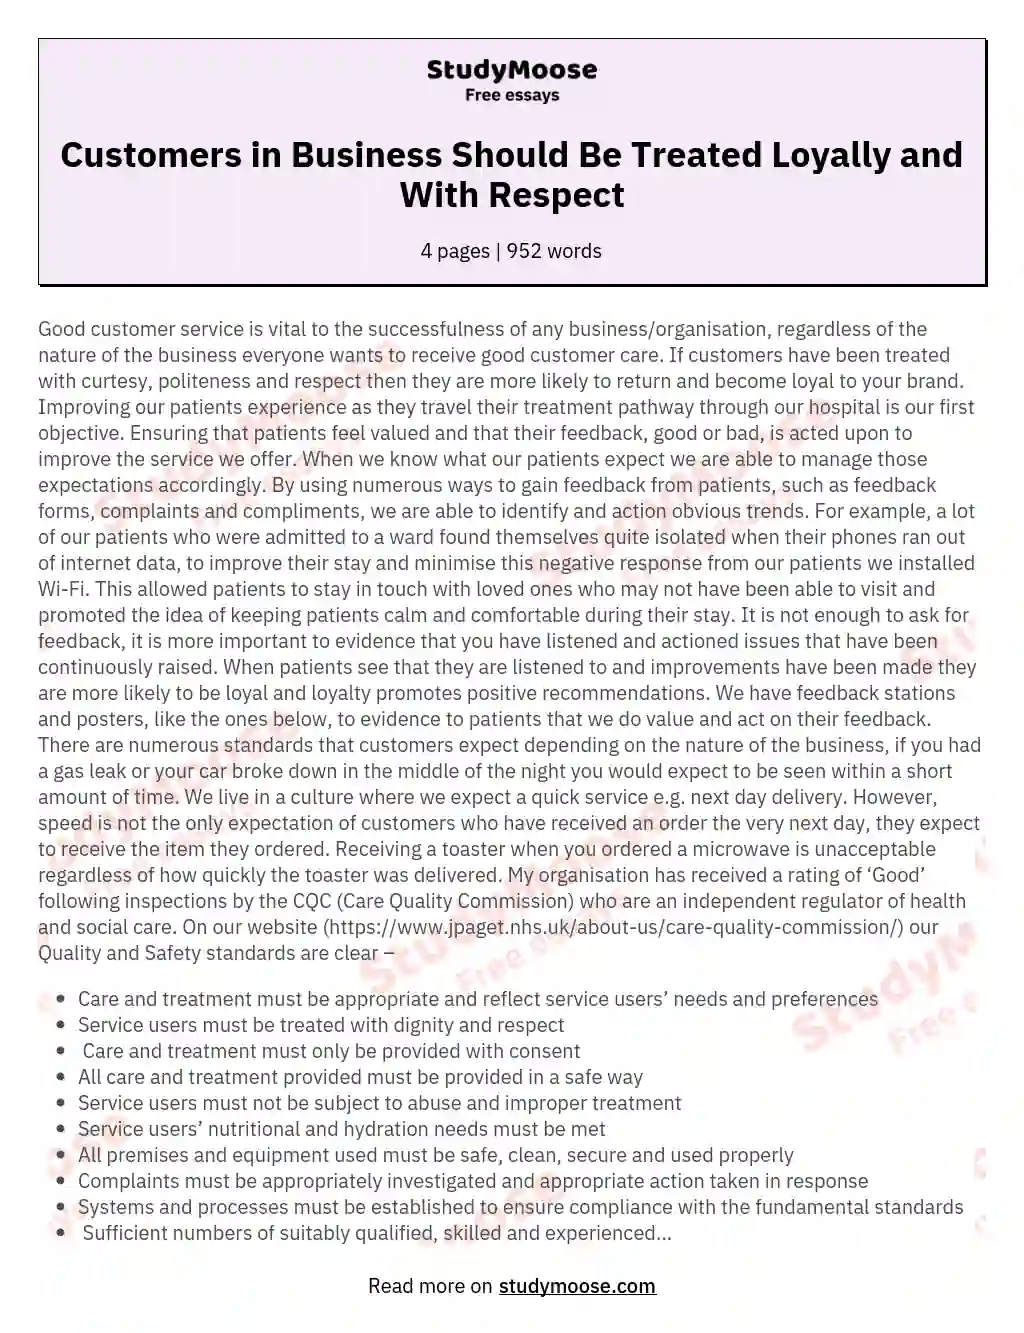 Customers in Business Should Be Treated Loyally and With Respect essay